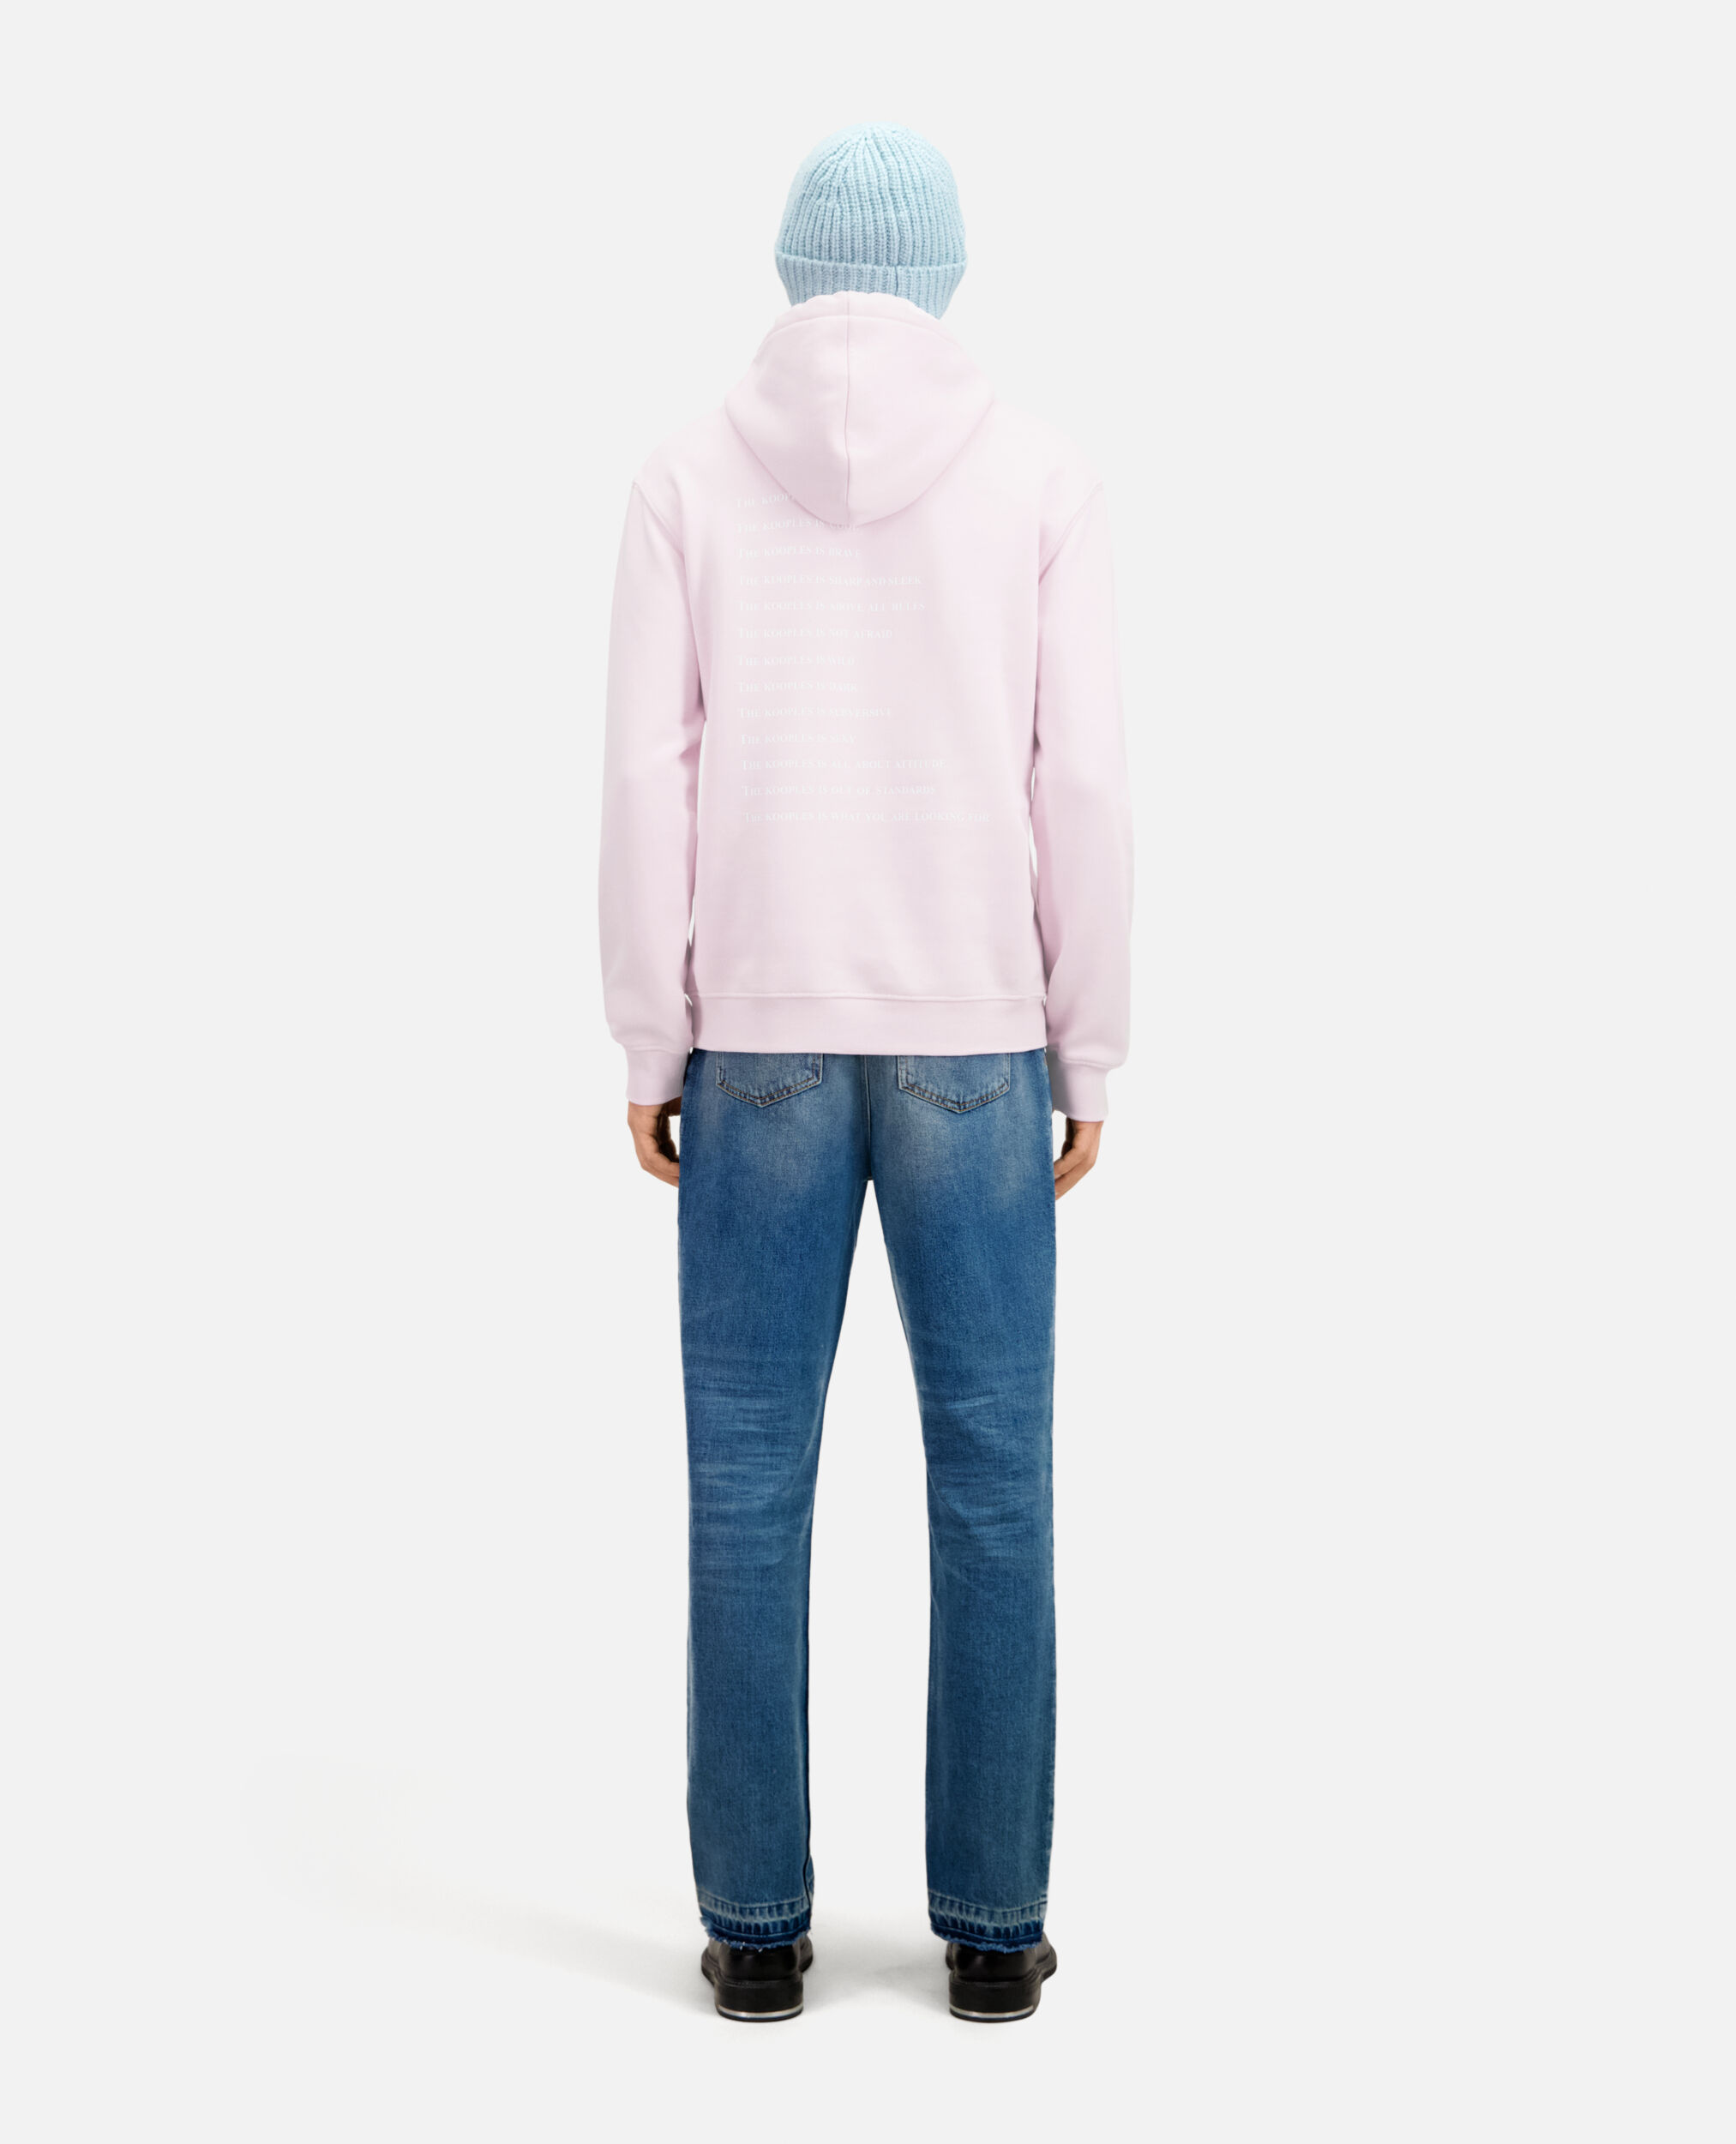 Sudadera capucha What is rosa para hombre, PALE PINK, hi-res image number null